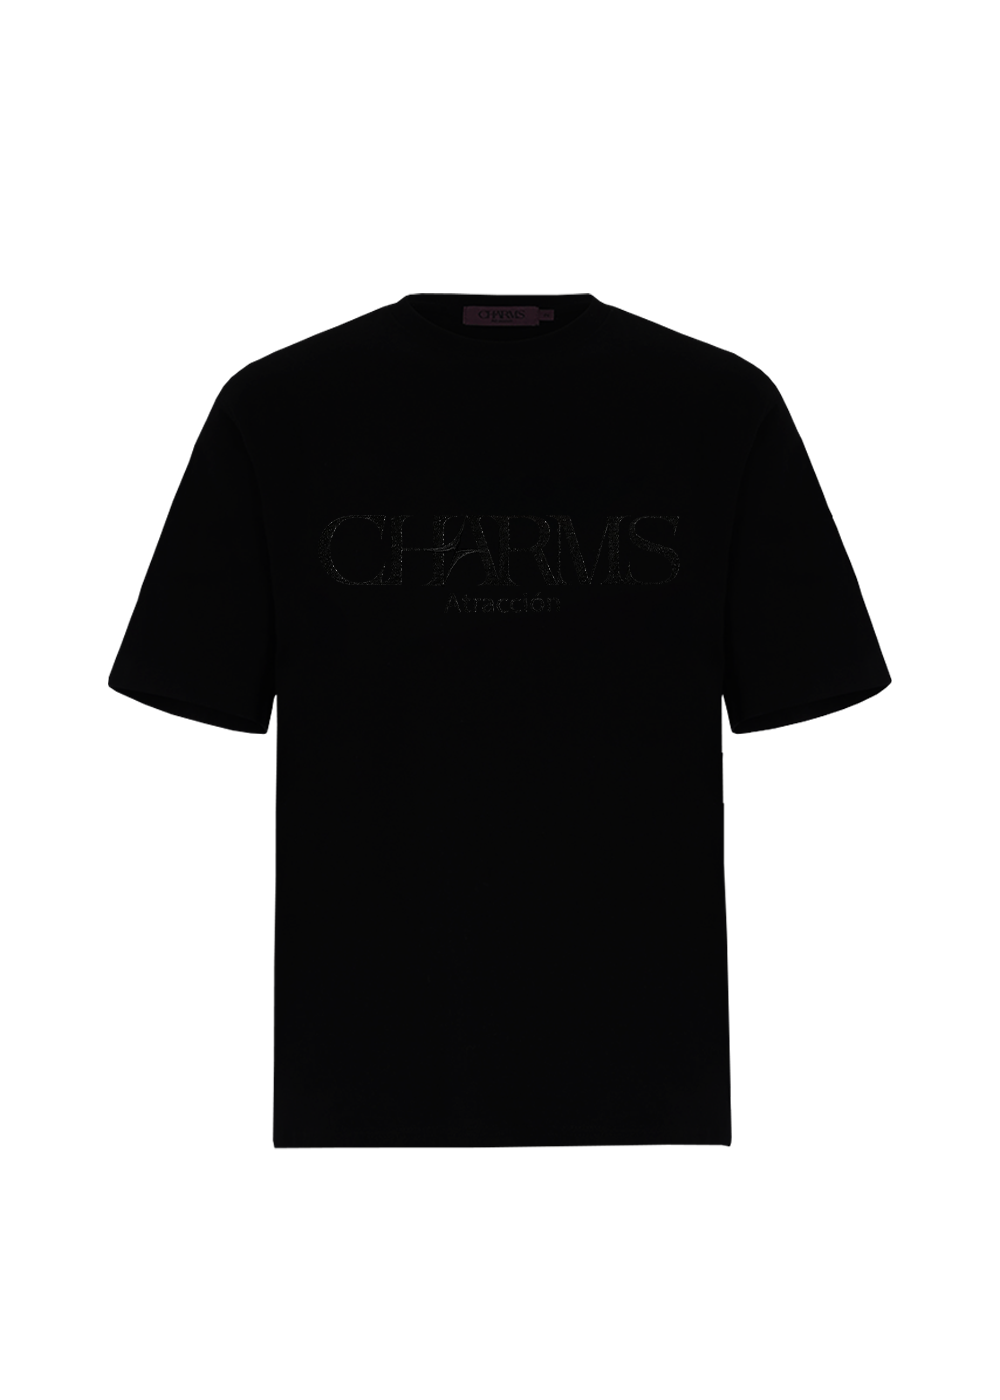 CHARMS Signature T-shirt